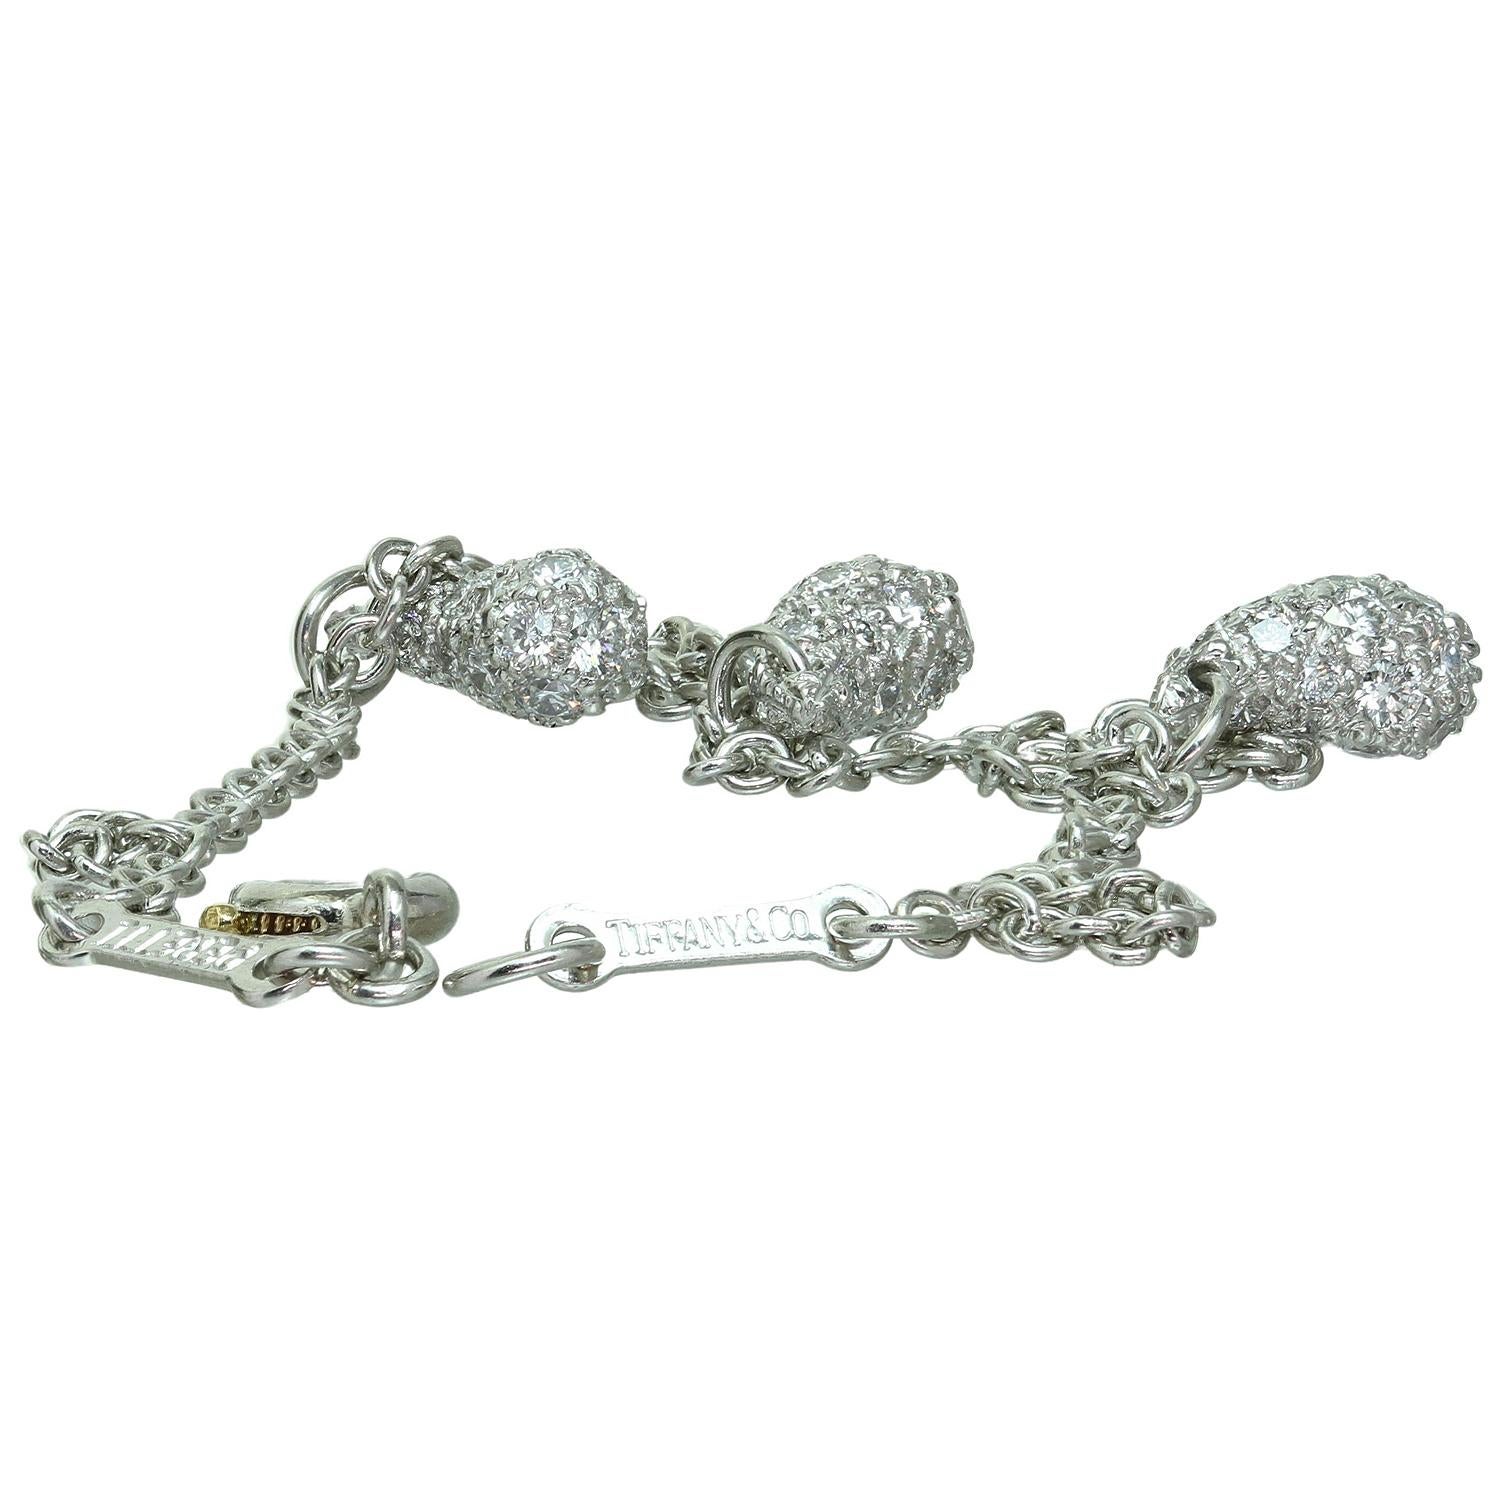 This fabulous bracelet designed by Elsa Peretti for Tiffany & Co. is crafted in 950 platinum and features 3 teardrop charms pave-set with round brilliant F-G VVS2-VS1 diamonds. Made in United States circa 2010s. Measurements: 7